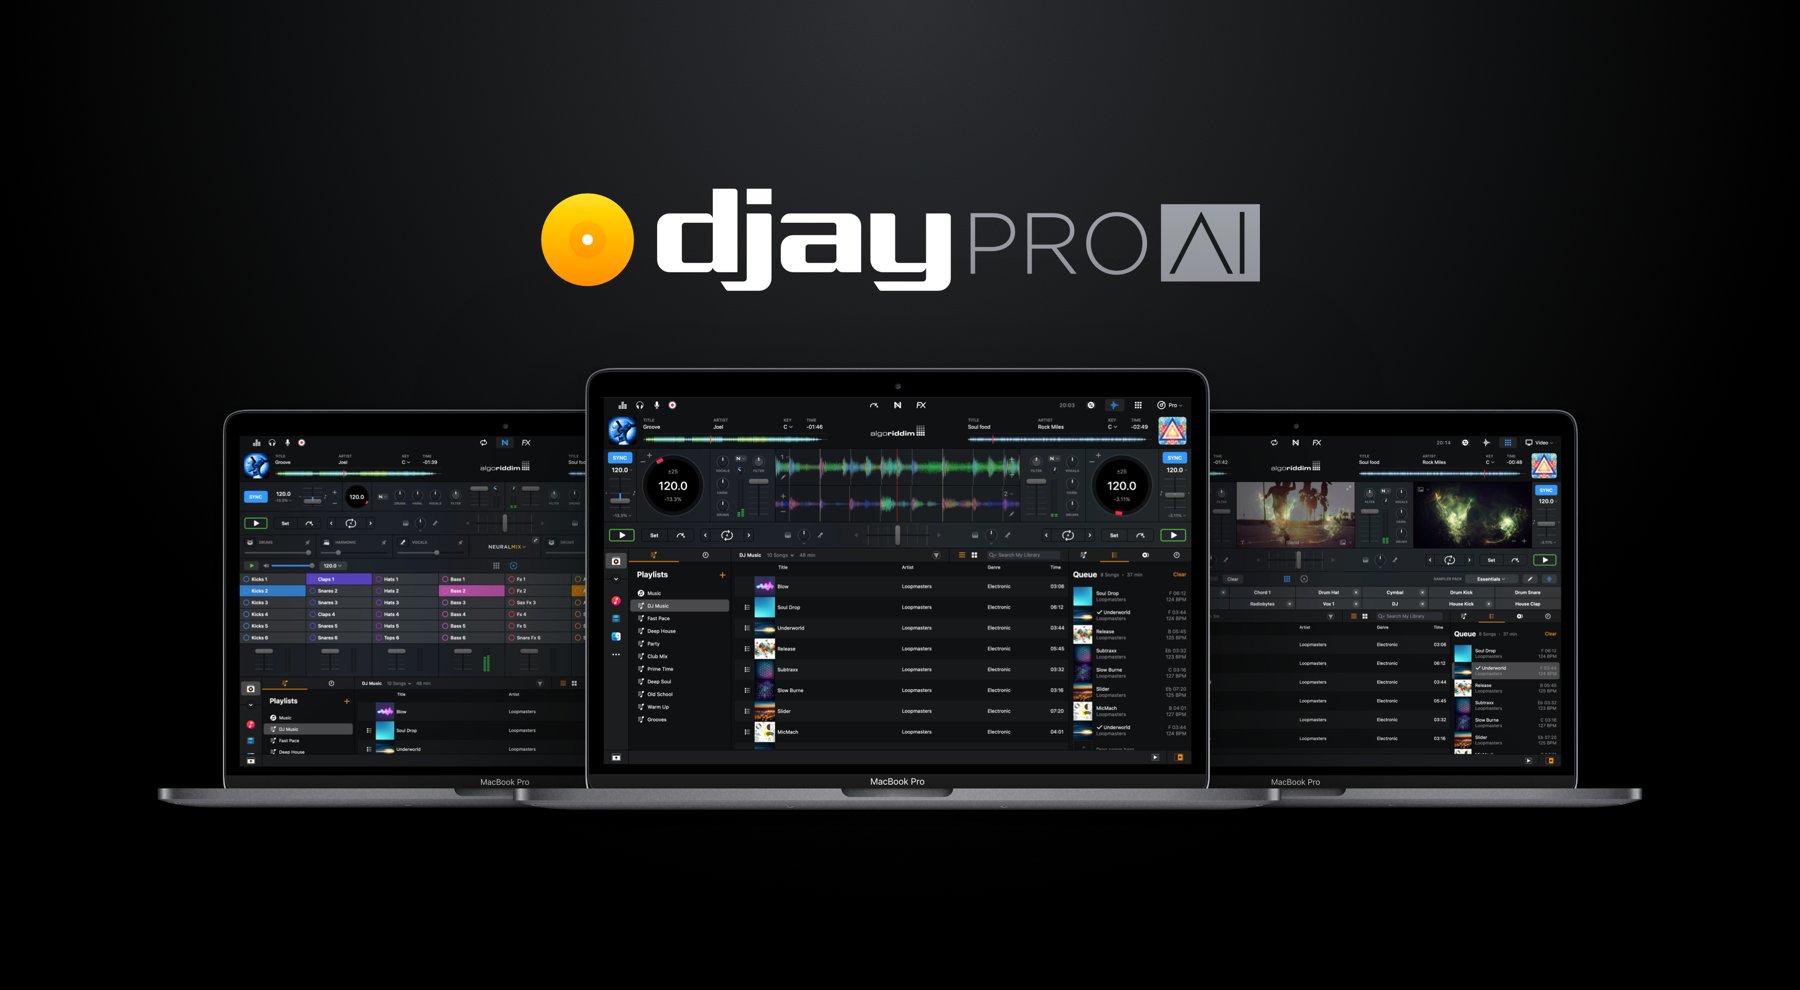 djay Pro AI for Mac with support for Apple’s new M1 chip